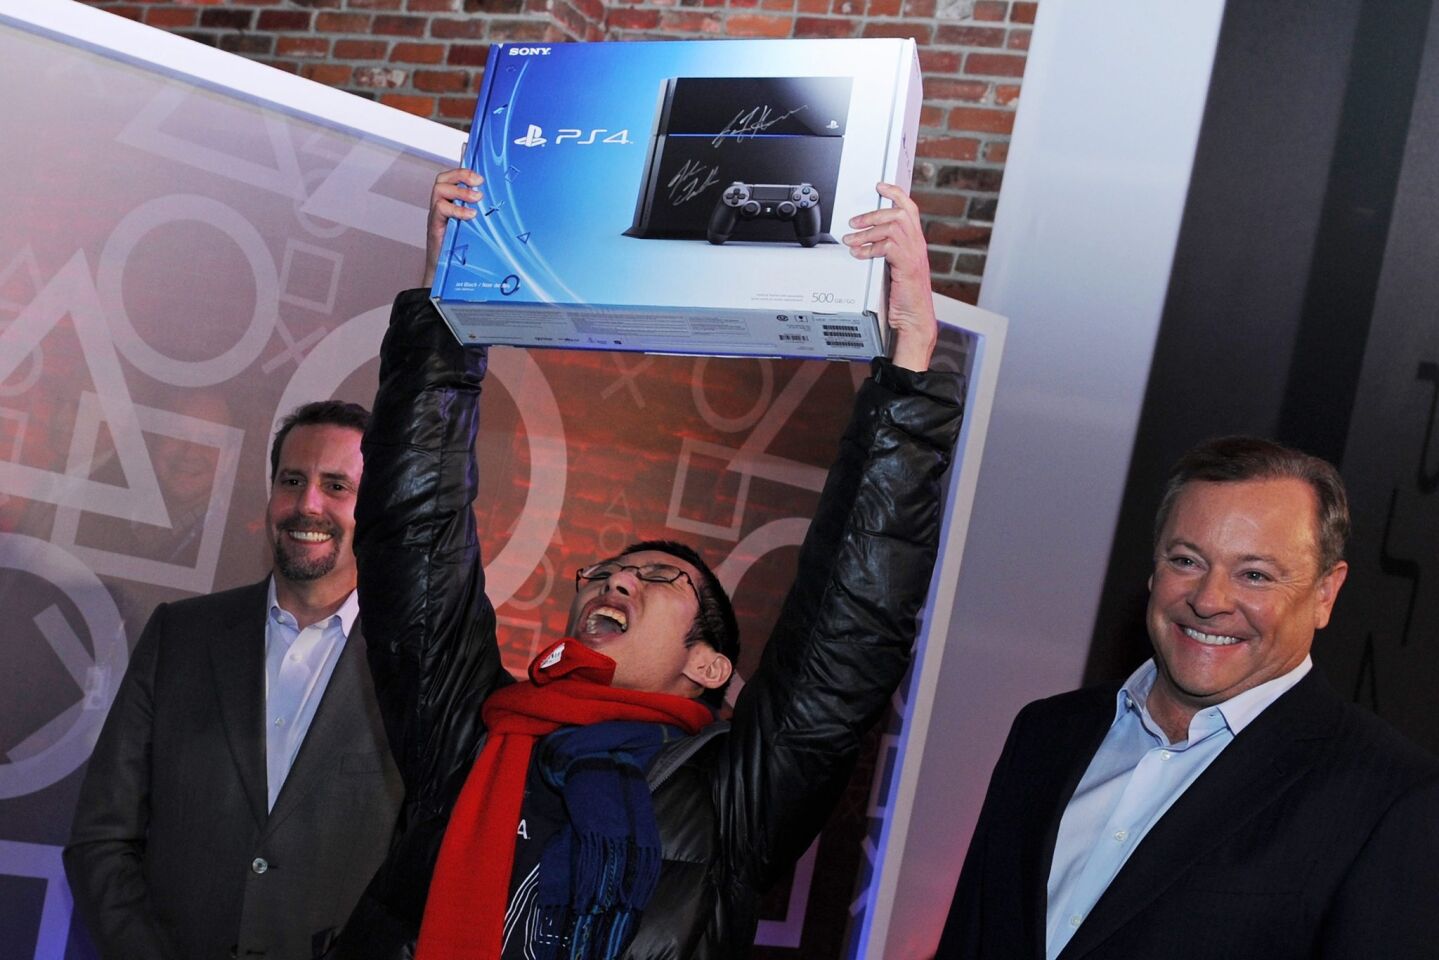 Scenes from the PS4 launch - Los Angeles